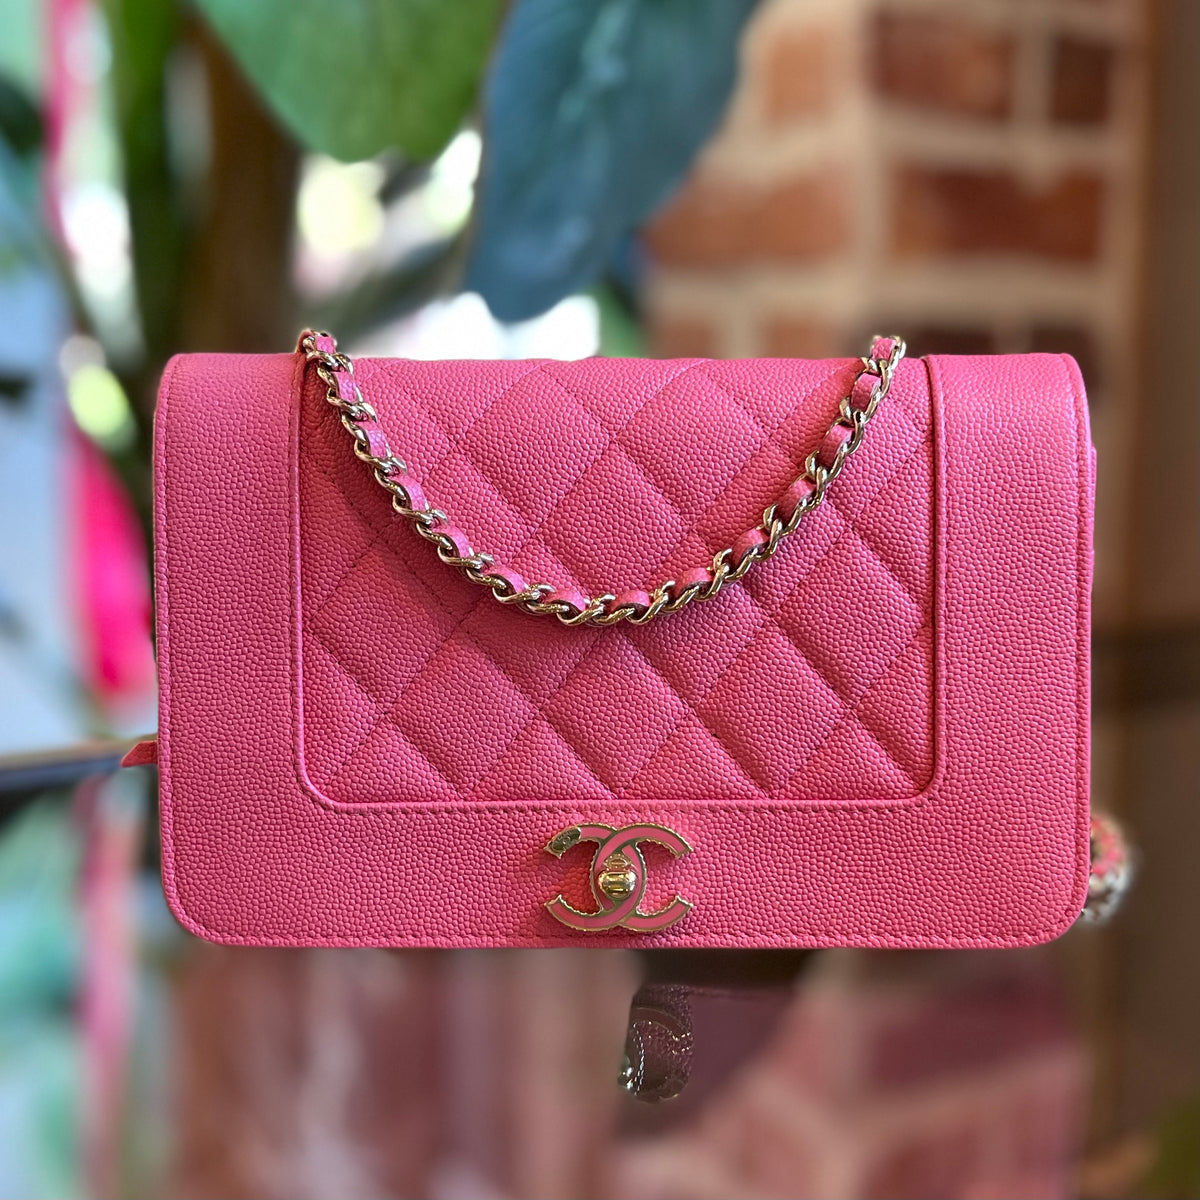 CHANEL Pink Caviar Leather Mademoiselle Wallet on Chain - The Purse Ladies